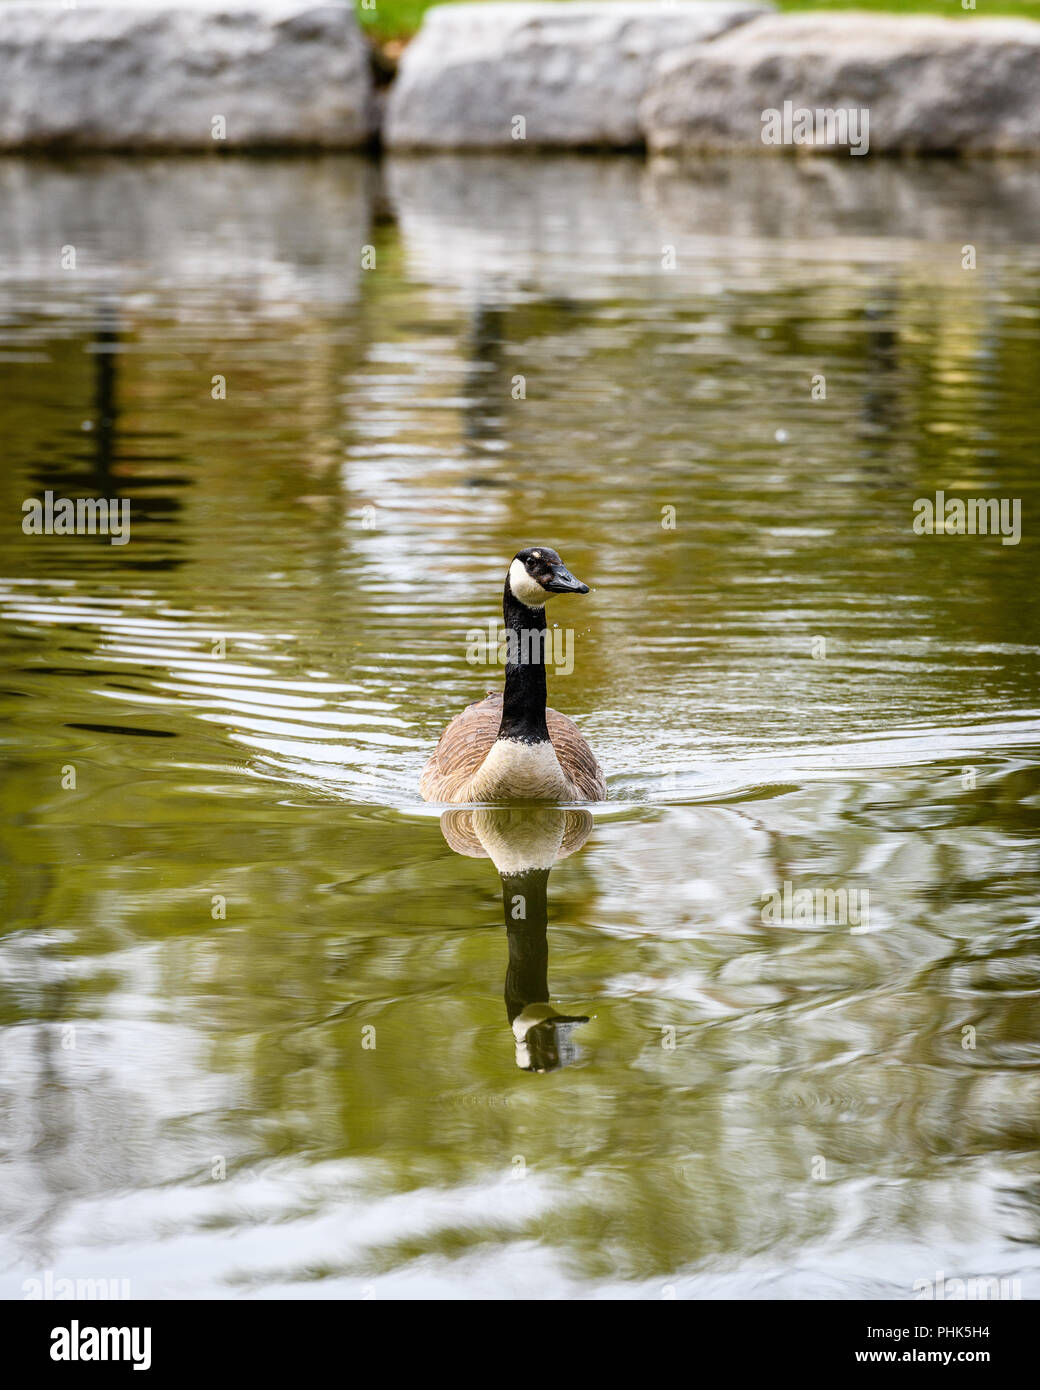 Canada Goose Swimming Lazily In A Pond Stock Photo